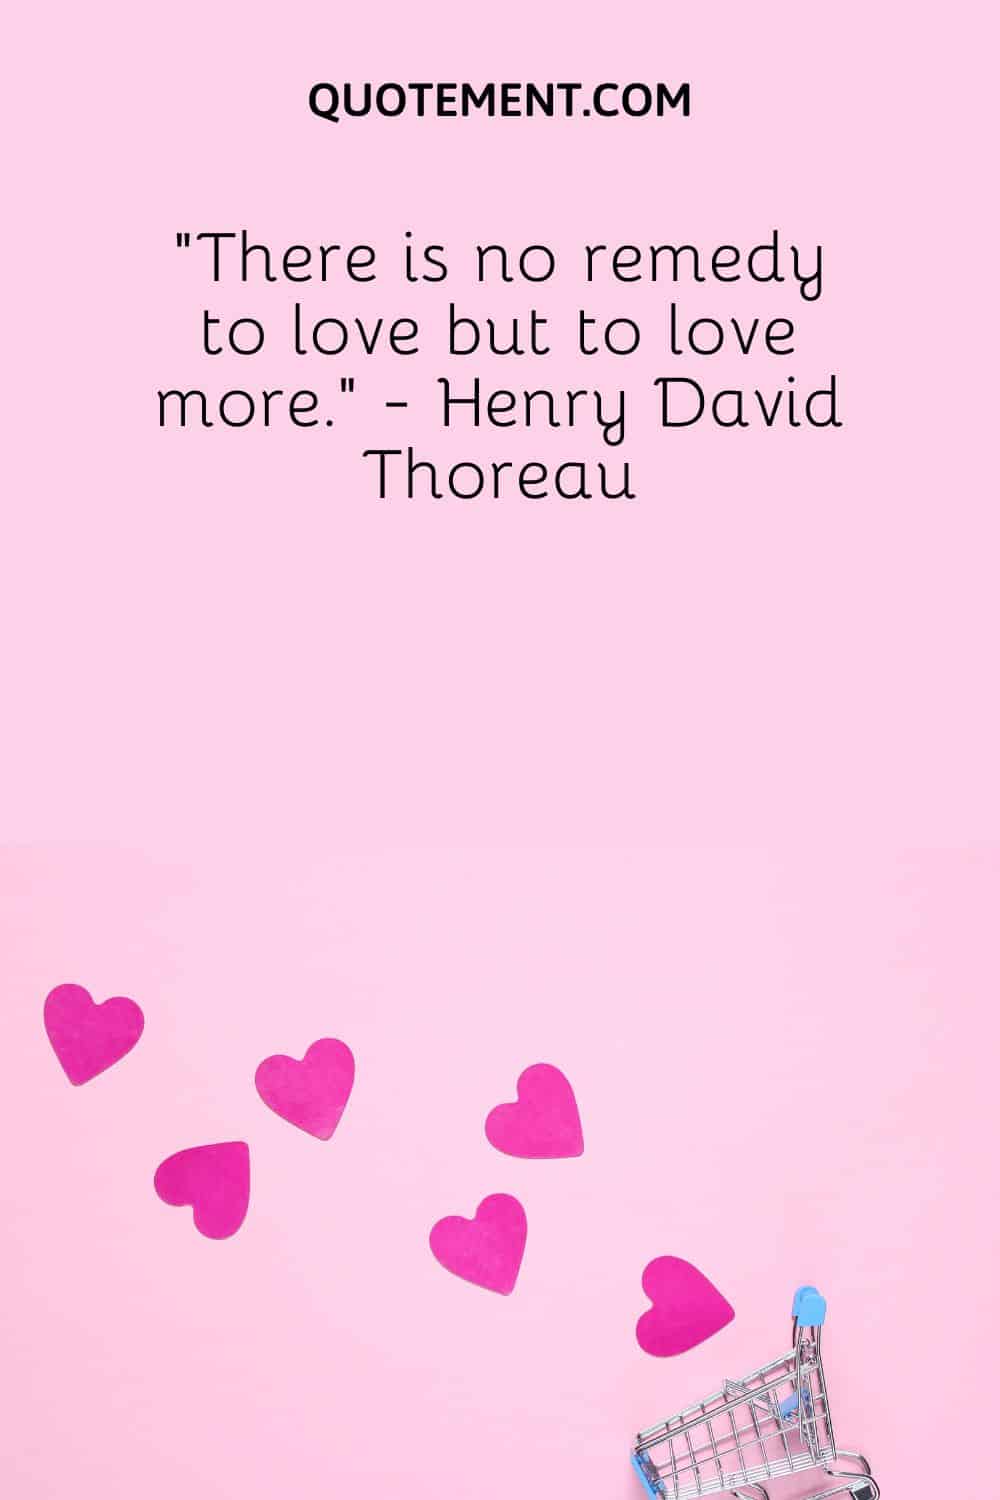 “There is no remedy to love but to love more.” - Henry David Thoreau